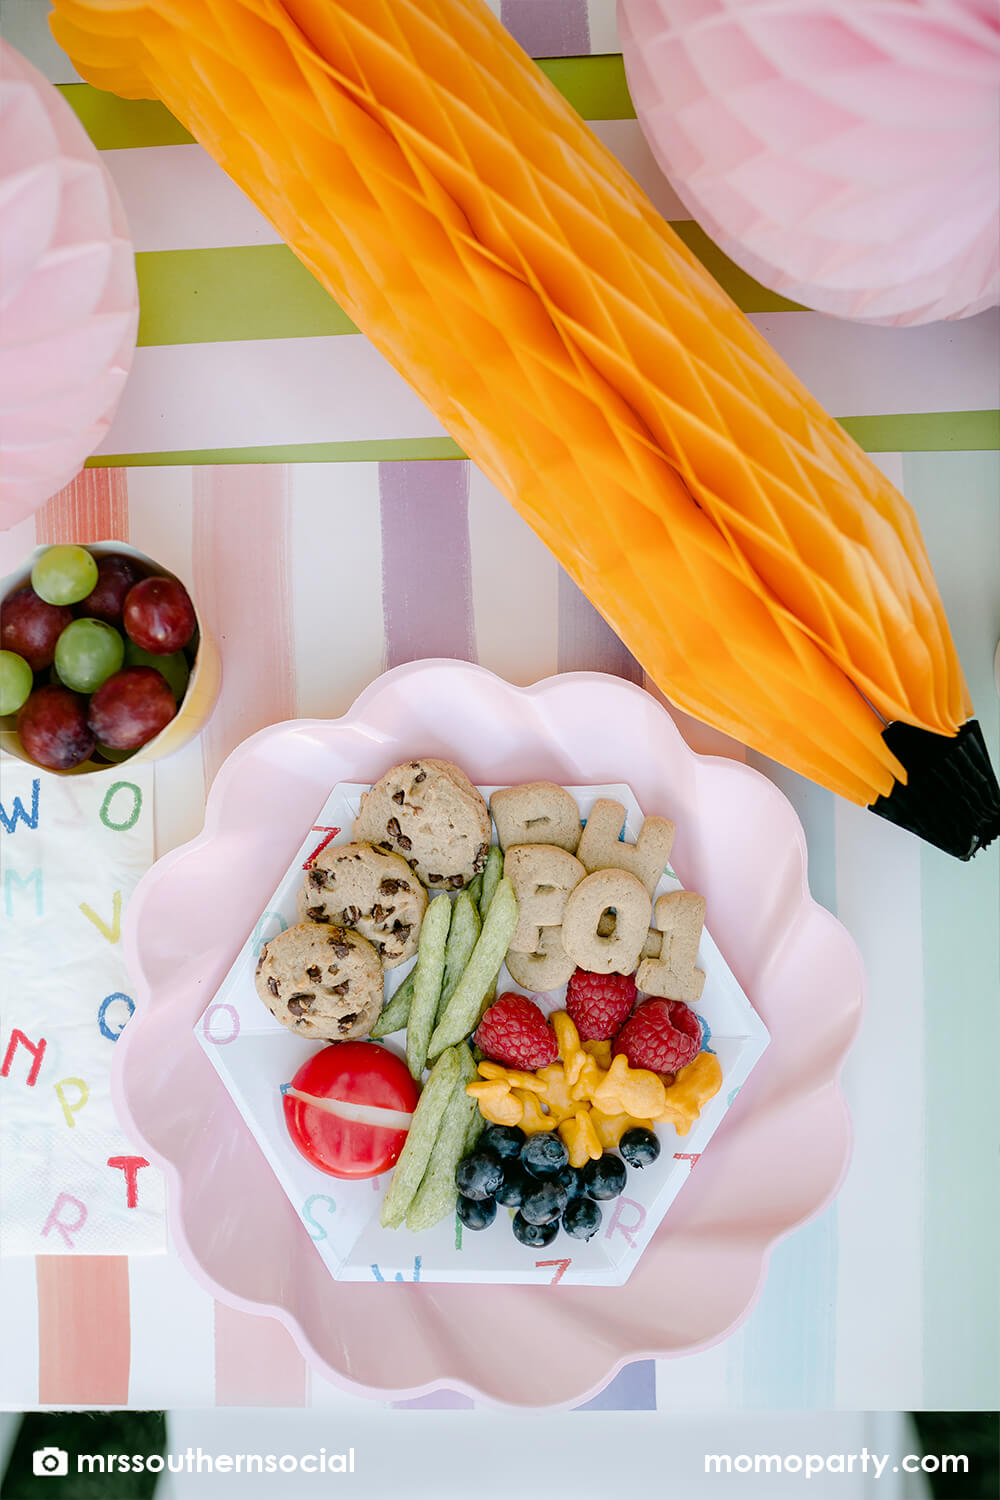 A pastel back to school party table featuring Momo Party's back to school party supplies including ABC alphabet plates, napkins party cups, and pencil shaped food cups. One the plates are kids snack ideas including fruits, cheeses, goldfish, ABC alphabet crackers. With pastel rainbow striped placemats and pastel rainbow pencil honeycombs and pink apple honeycombs, all together makes an adorable tablescape for kid's first day of school celebration.